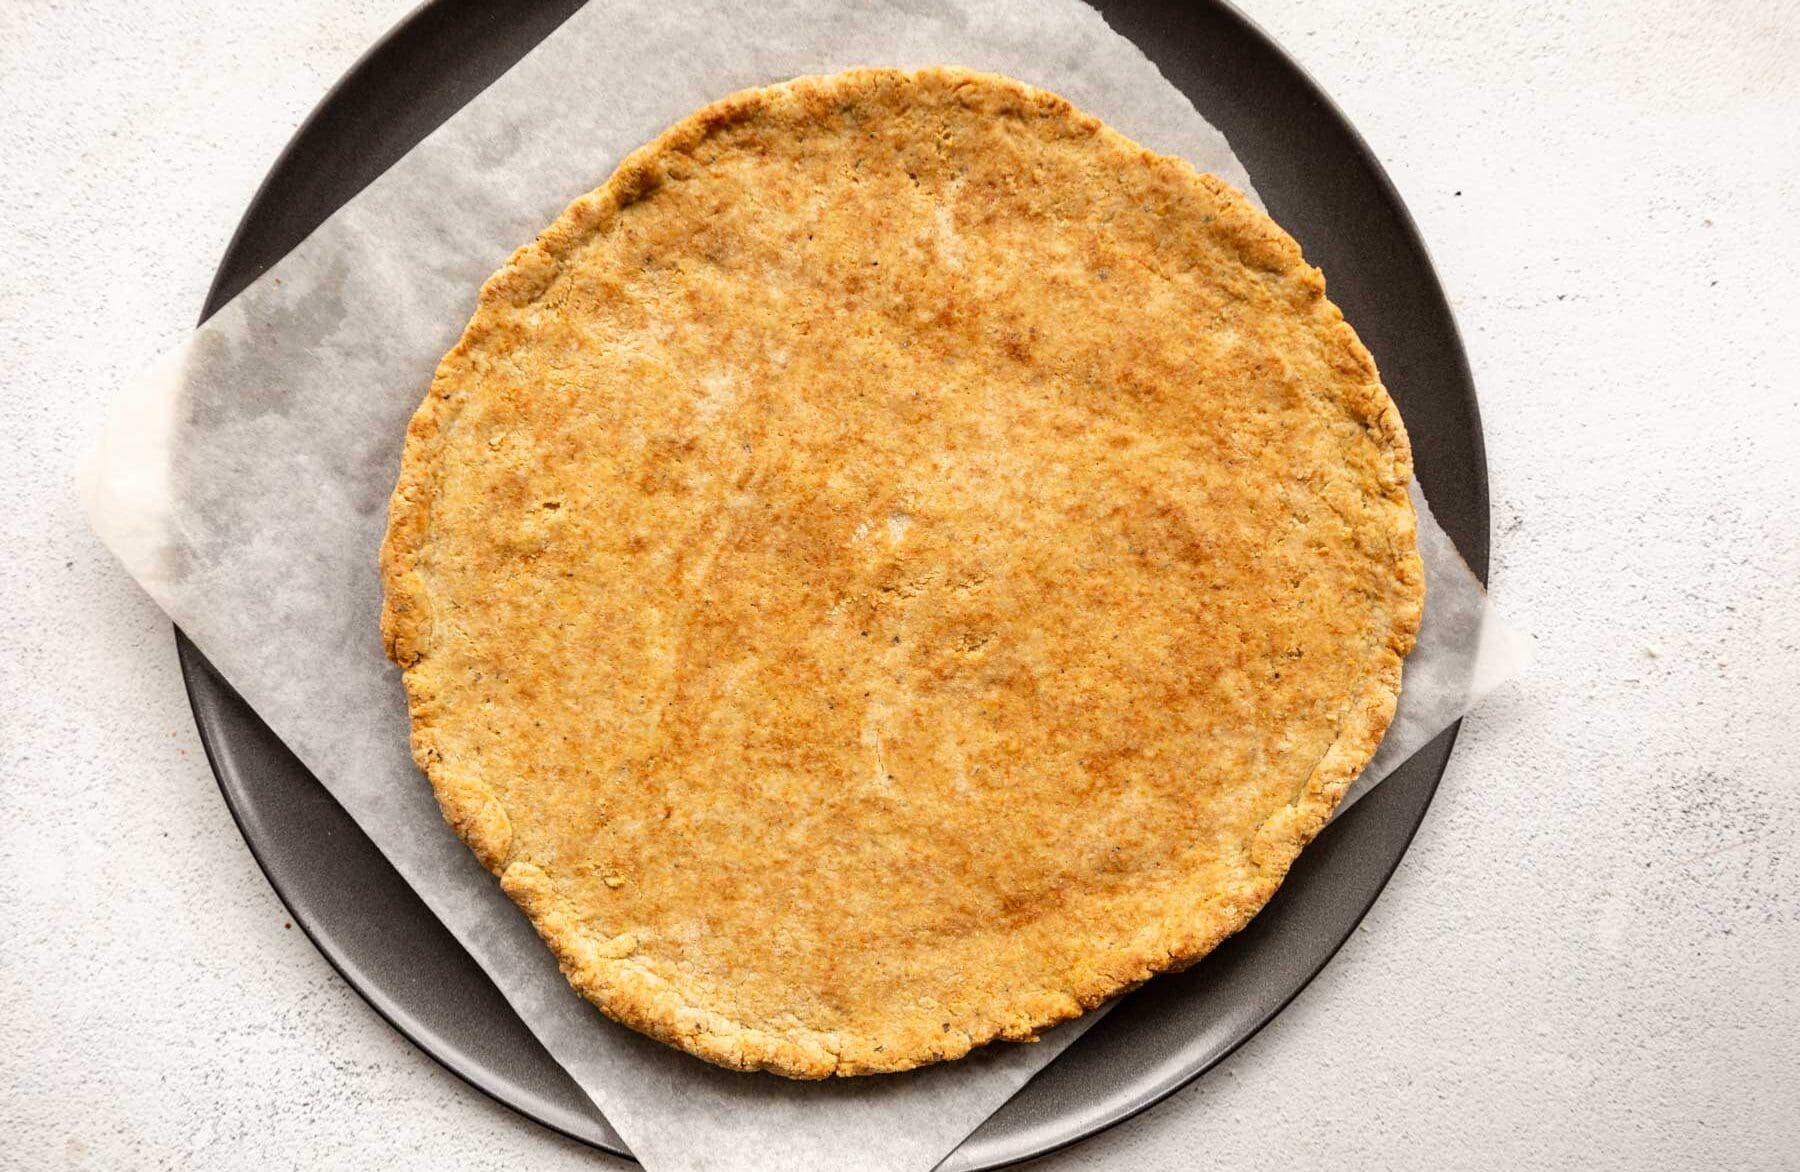 baked almond flour pizza crust on a parchment lined pizza pan.